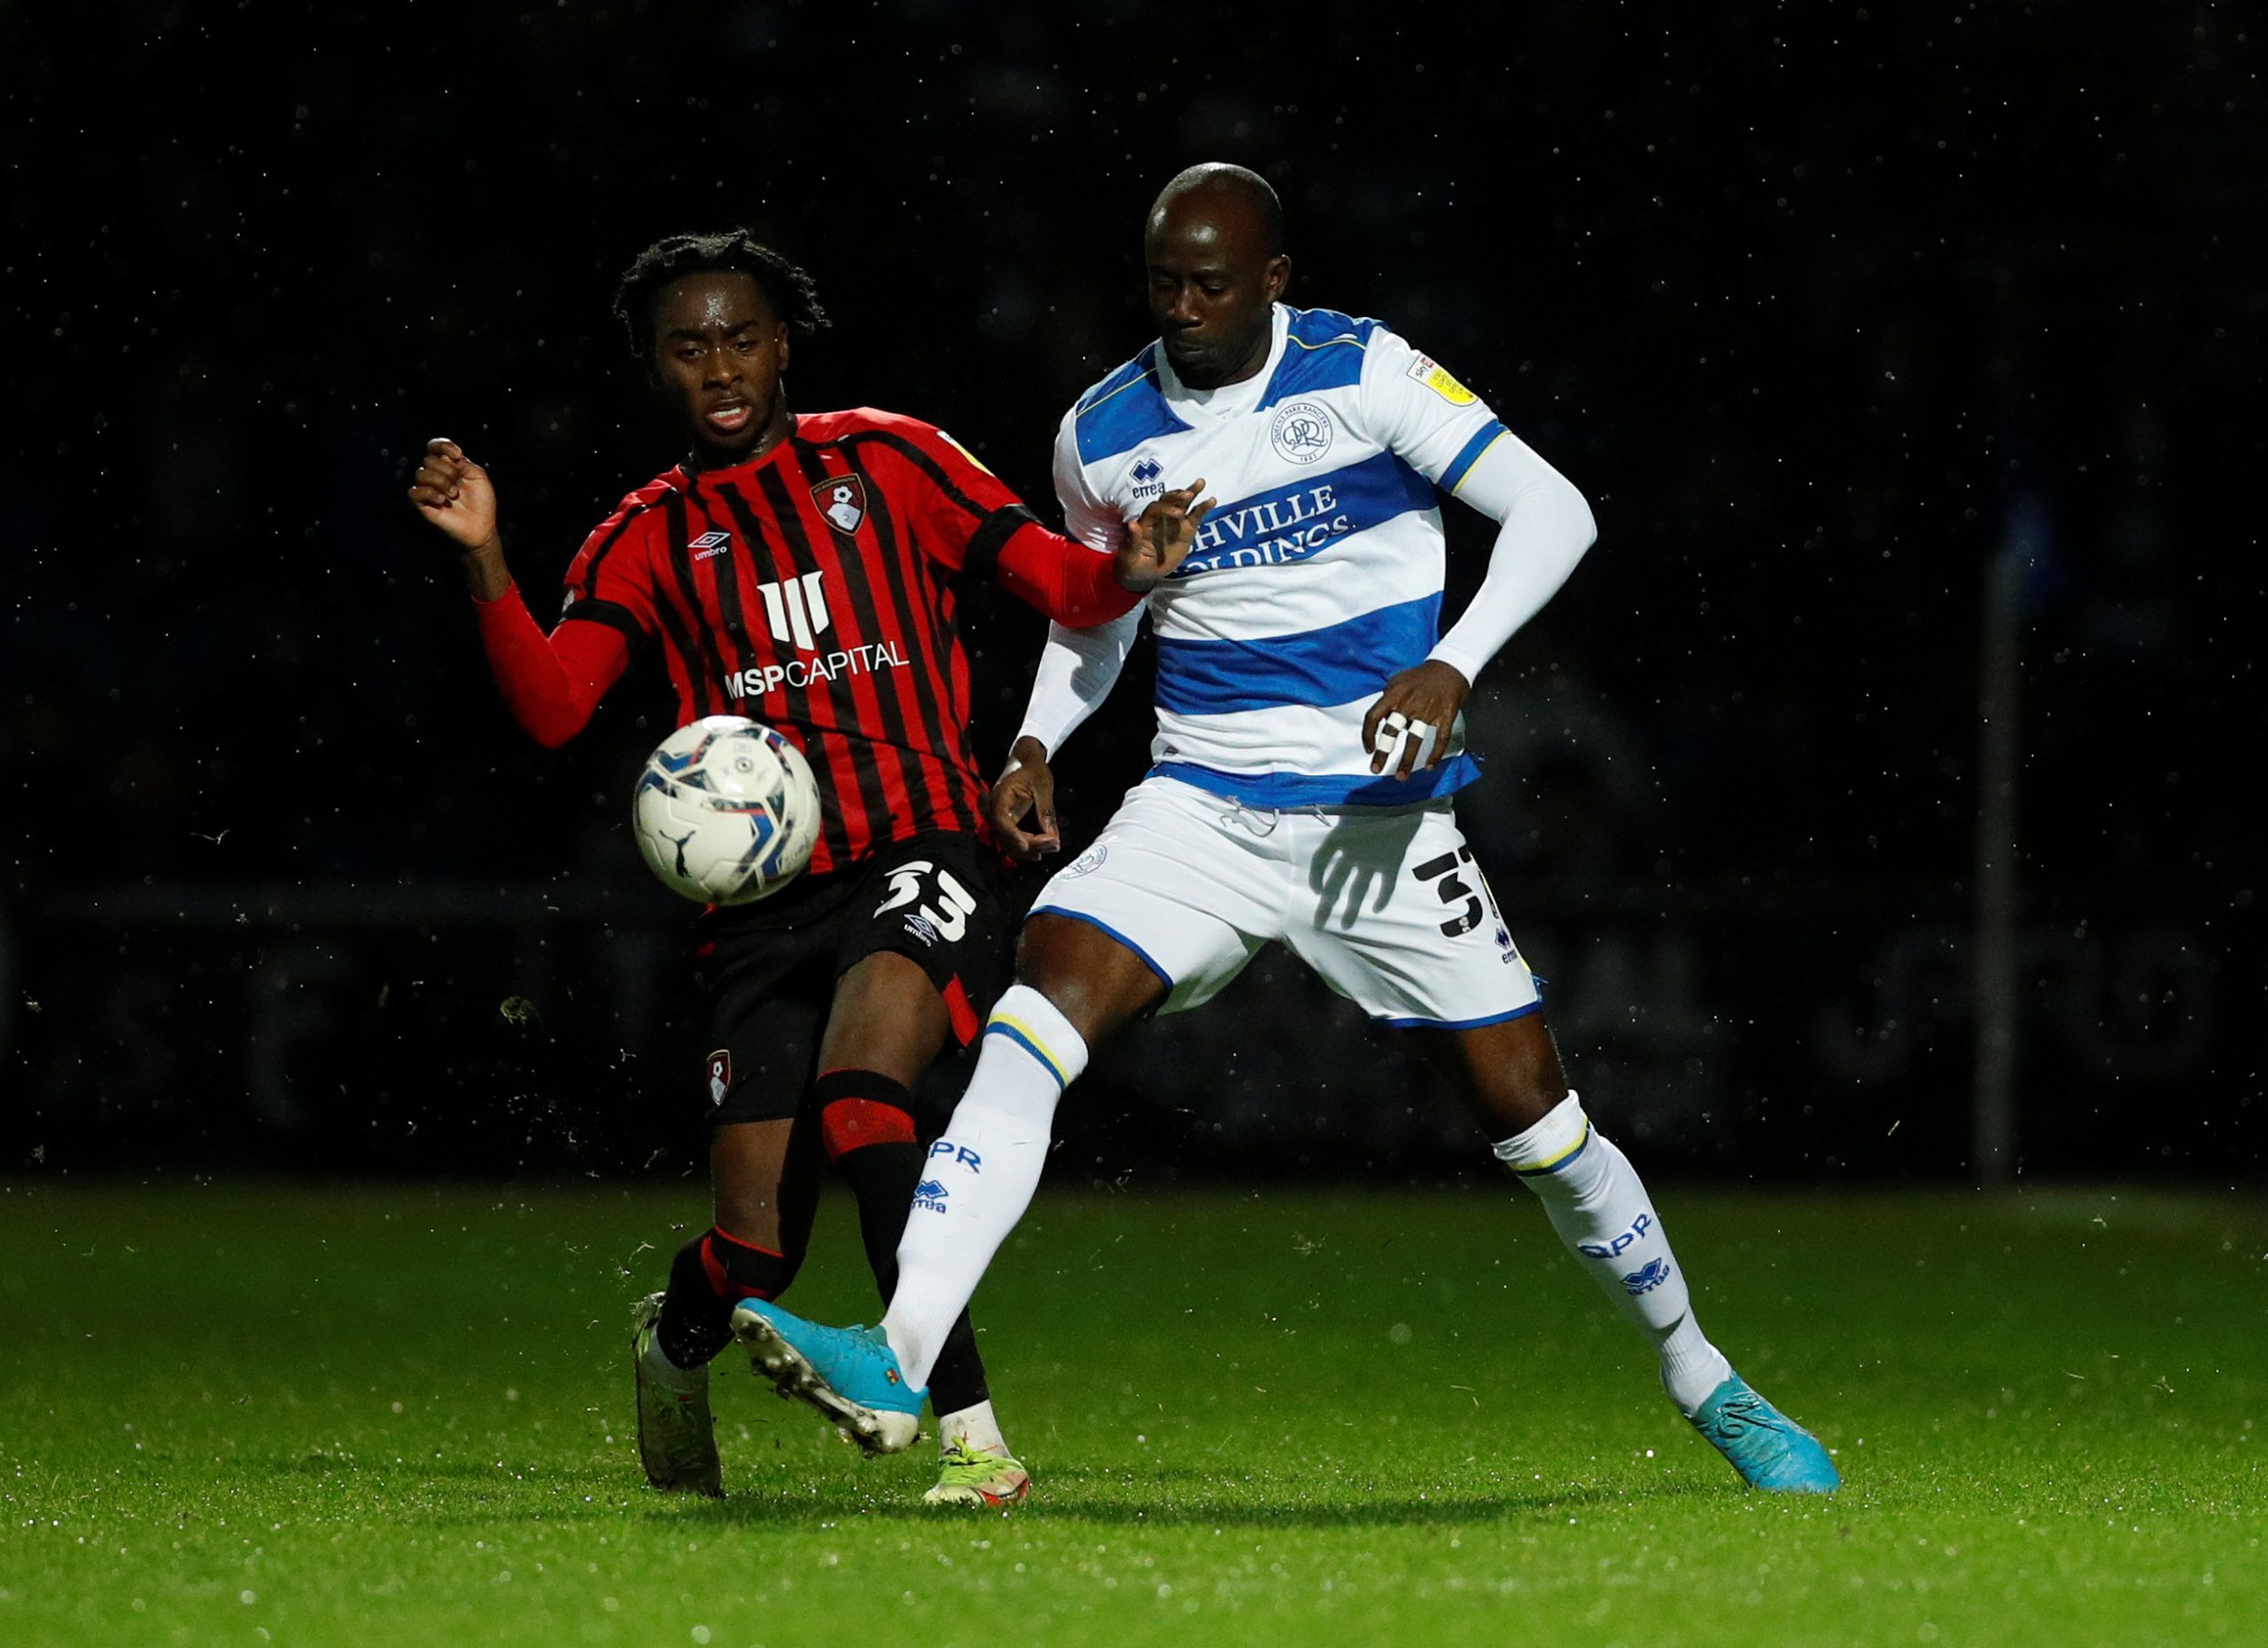 Soccer Football - Championship - Queens Park Rangers v AFC Bournemouth - Loftus Road, London, Britain - December 27, 2021 Queens Park Rangers' Albert Adomah in action with AFC Bournemouth's Jordan Zemura  Action Images/Andrew Boyers  EDITORIAL USE ONLY. No use with unauthorized audio, video, data, fixture lists, club/league logos or 